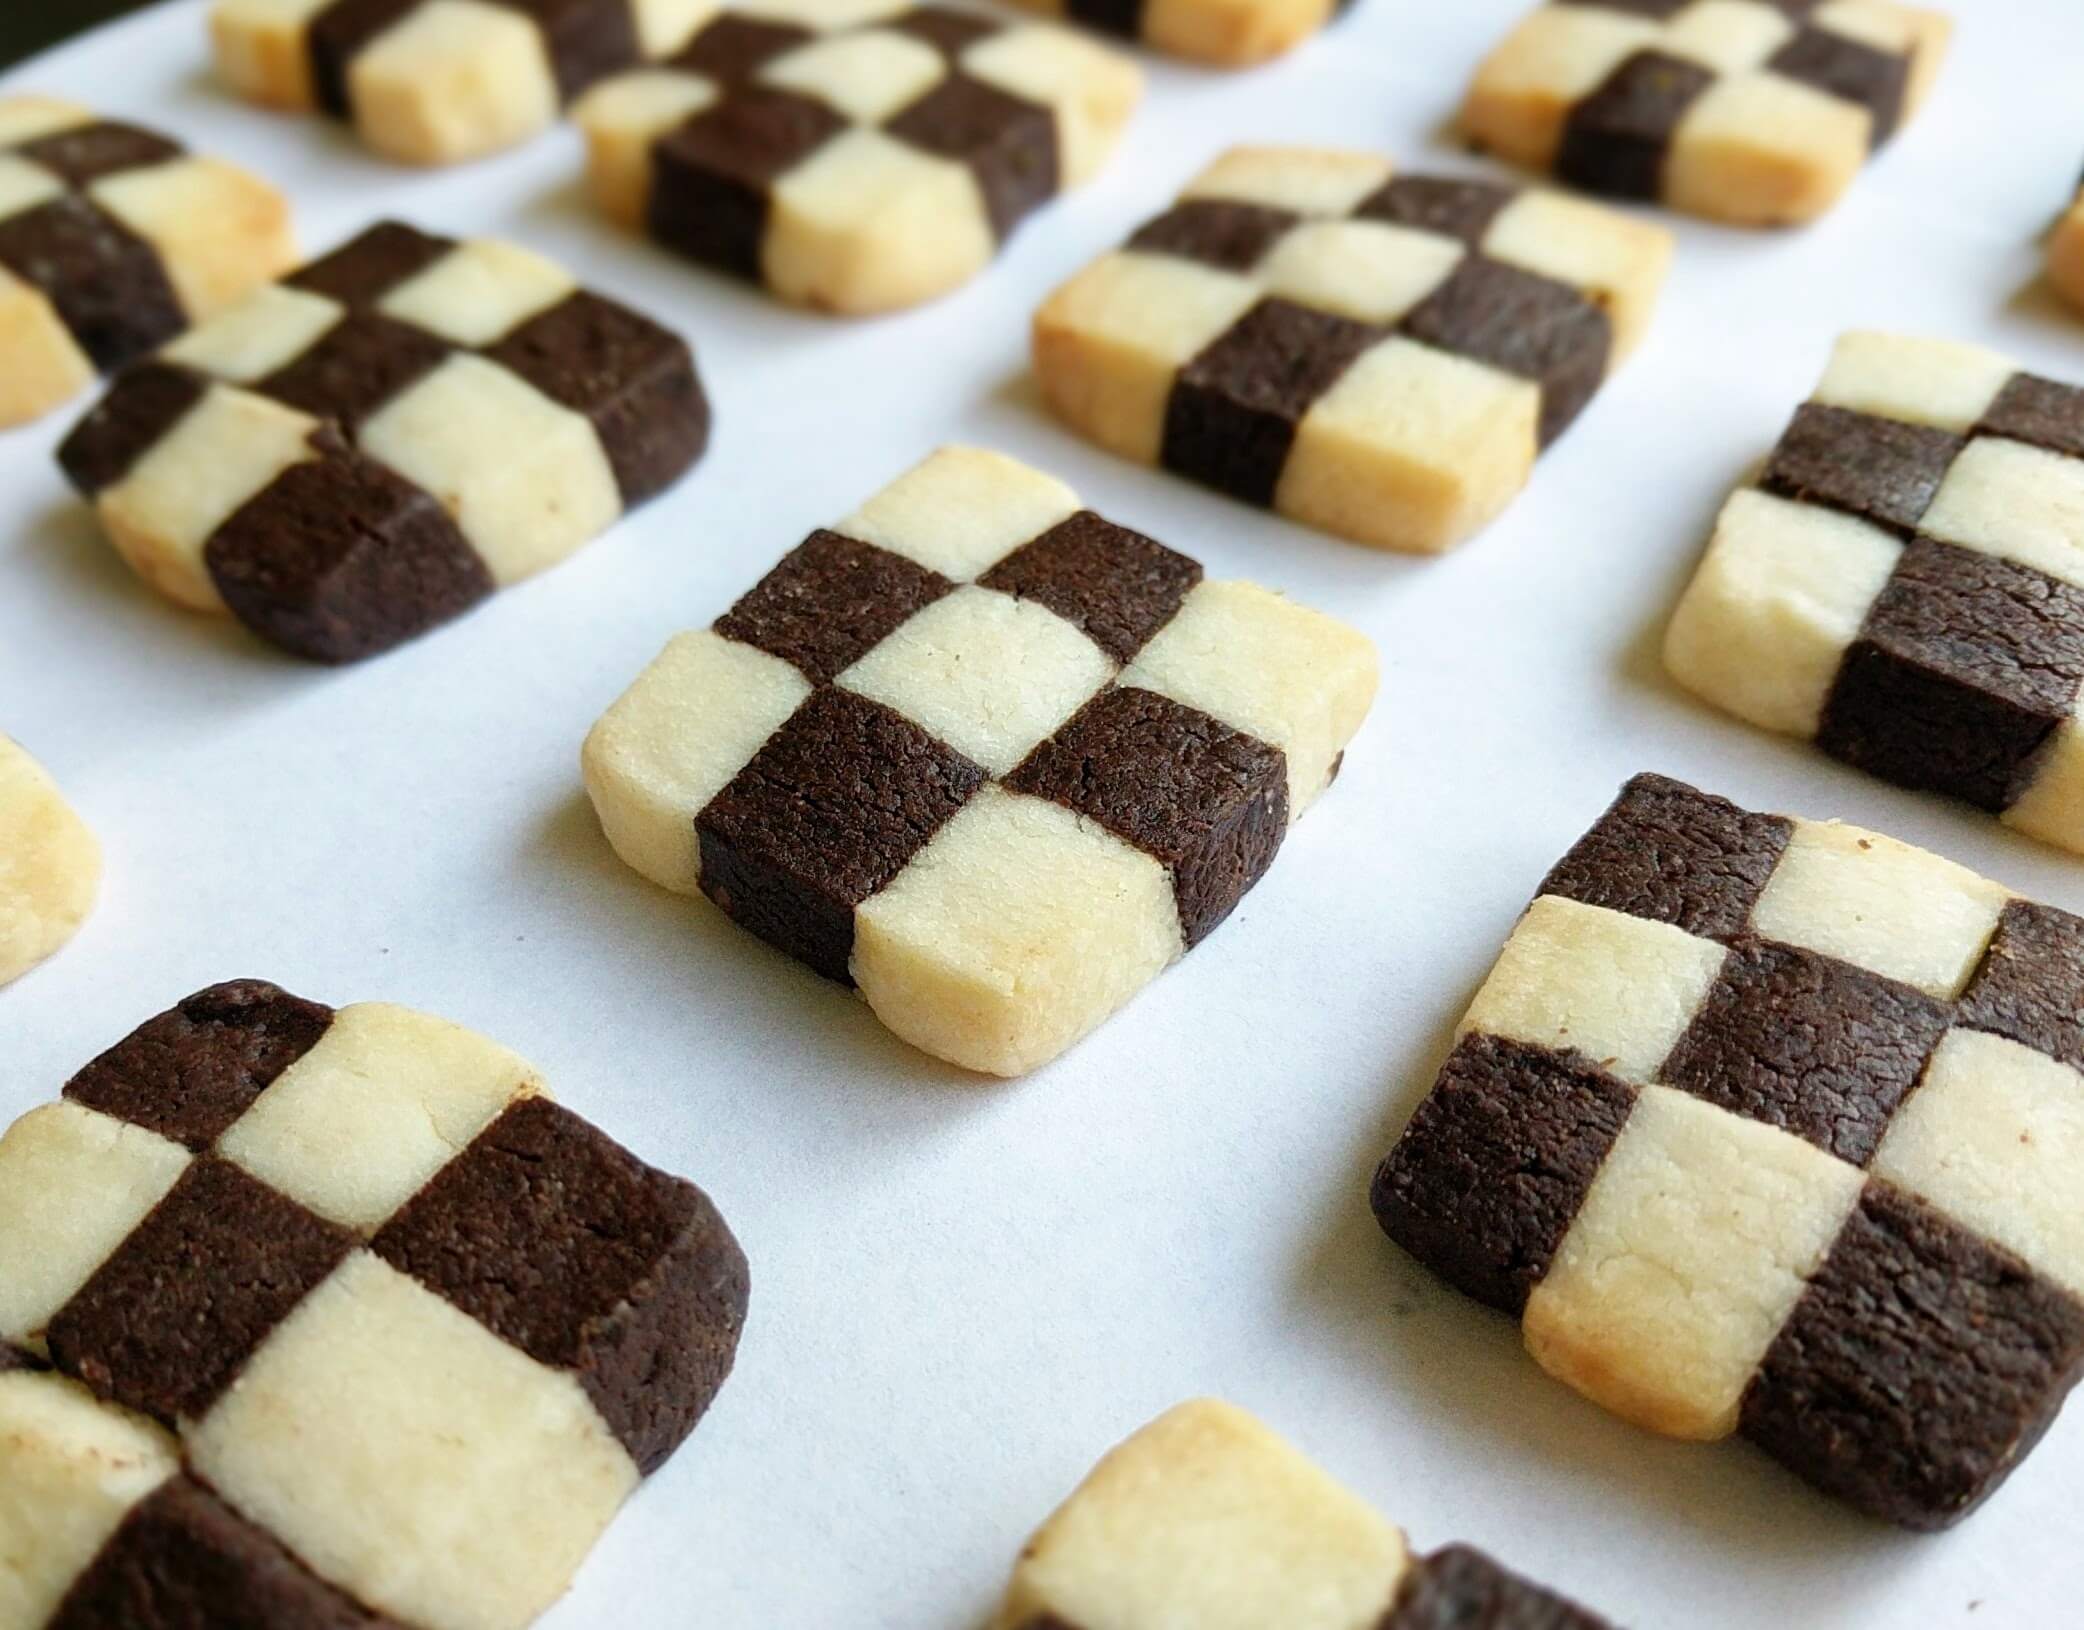 Checkerboard Cookies Recipe Step By Step Instructions